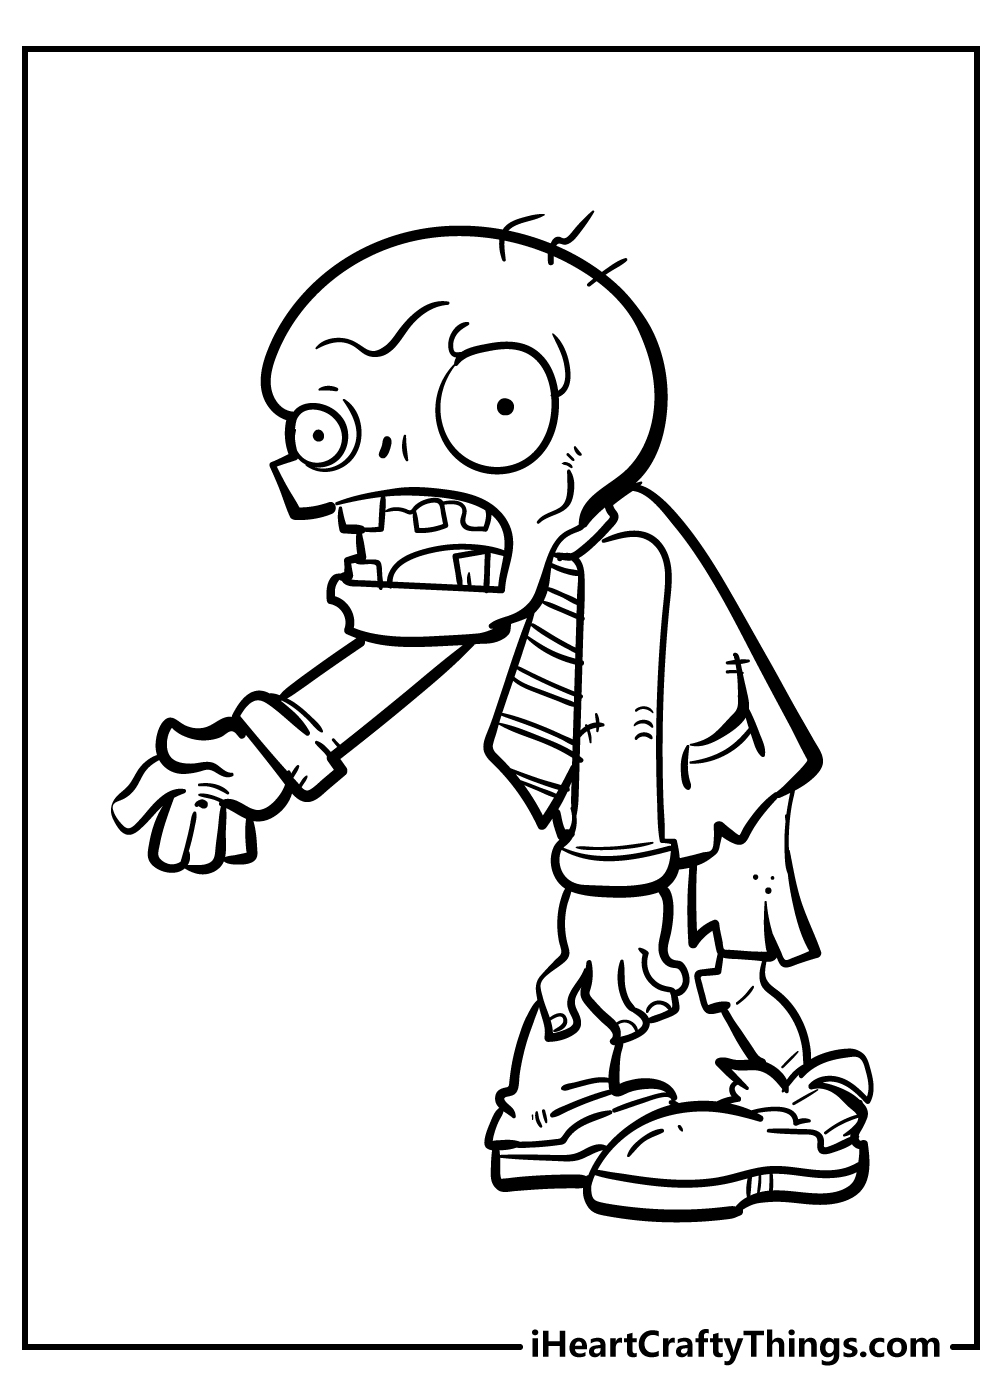 Plants Vs. Zombies Coloring Pages for adults free printable